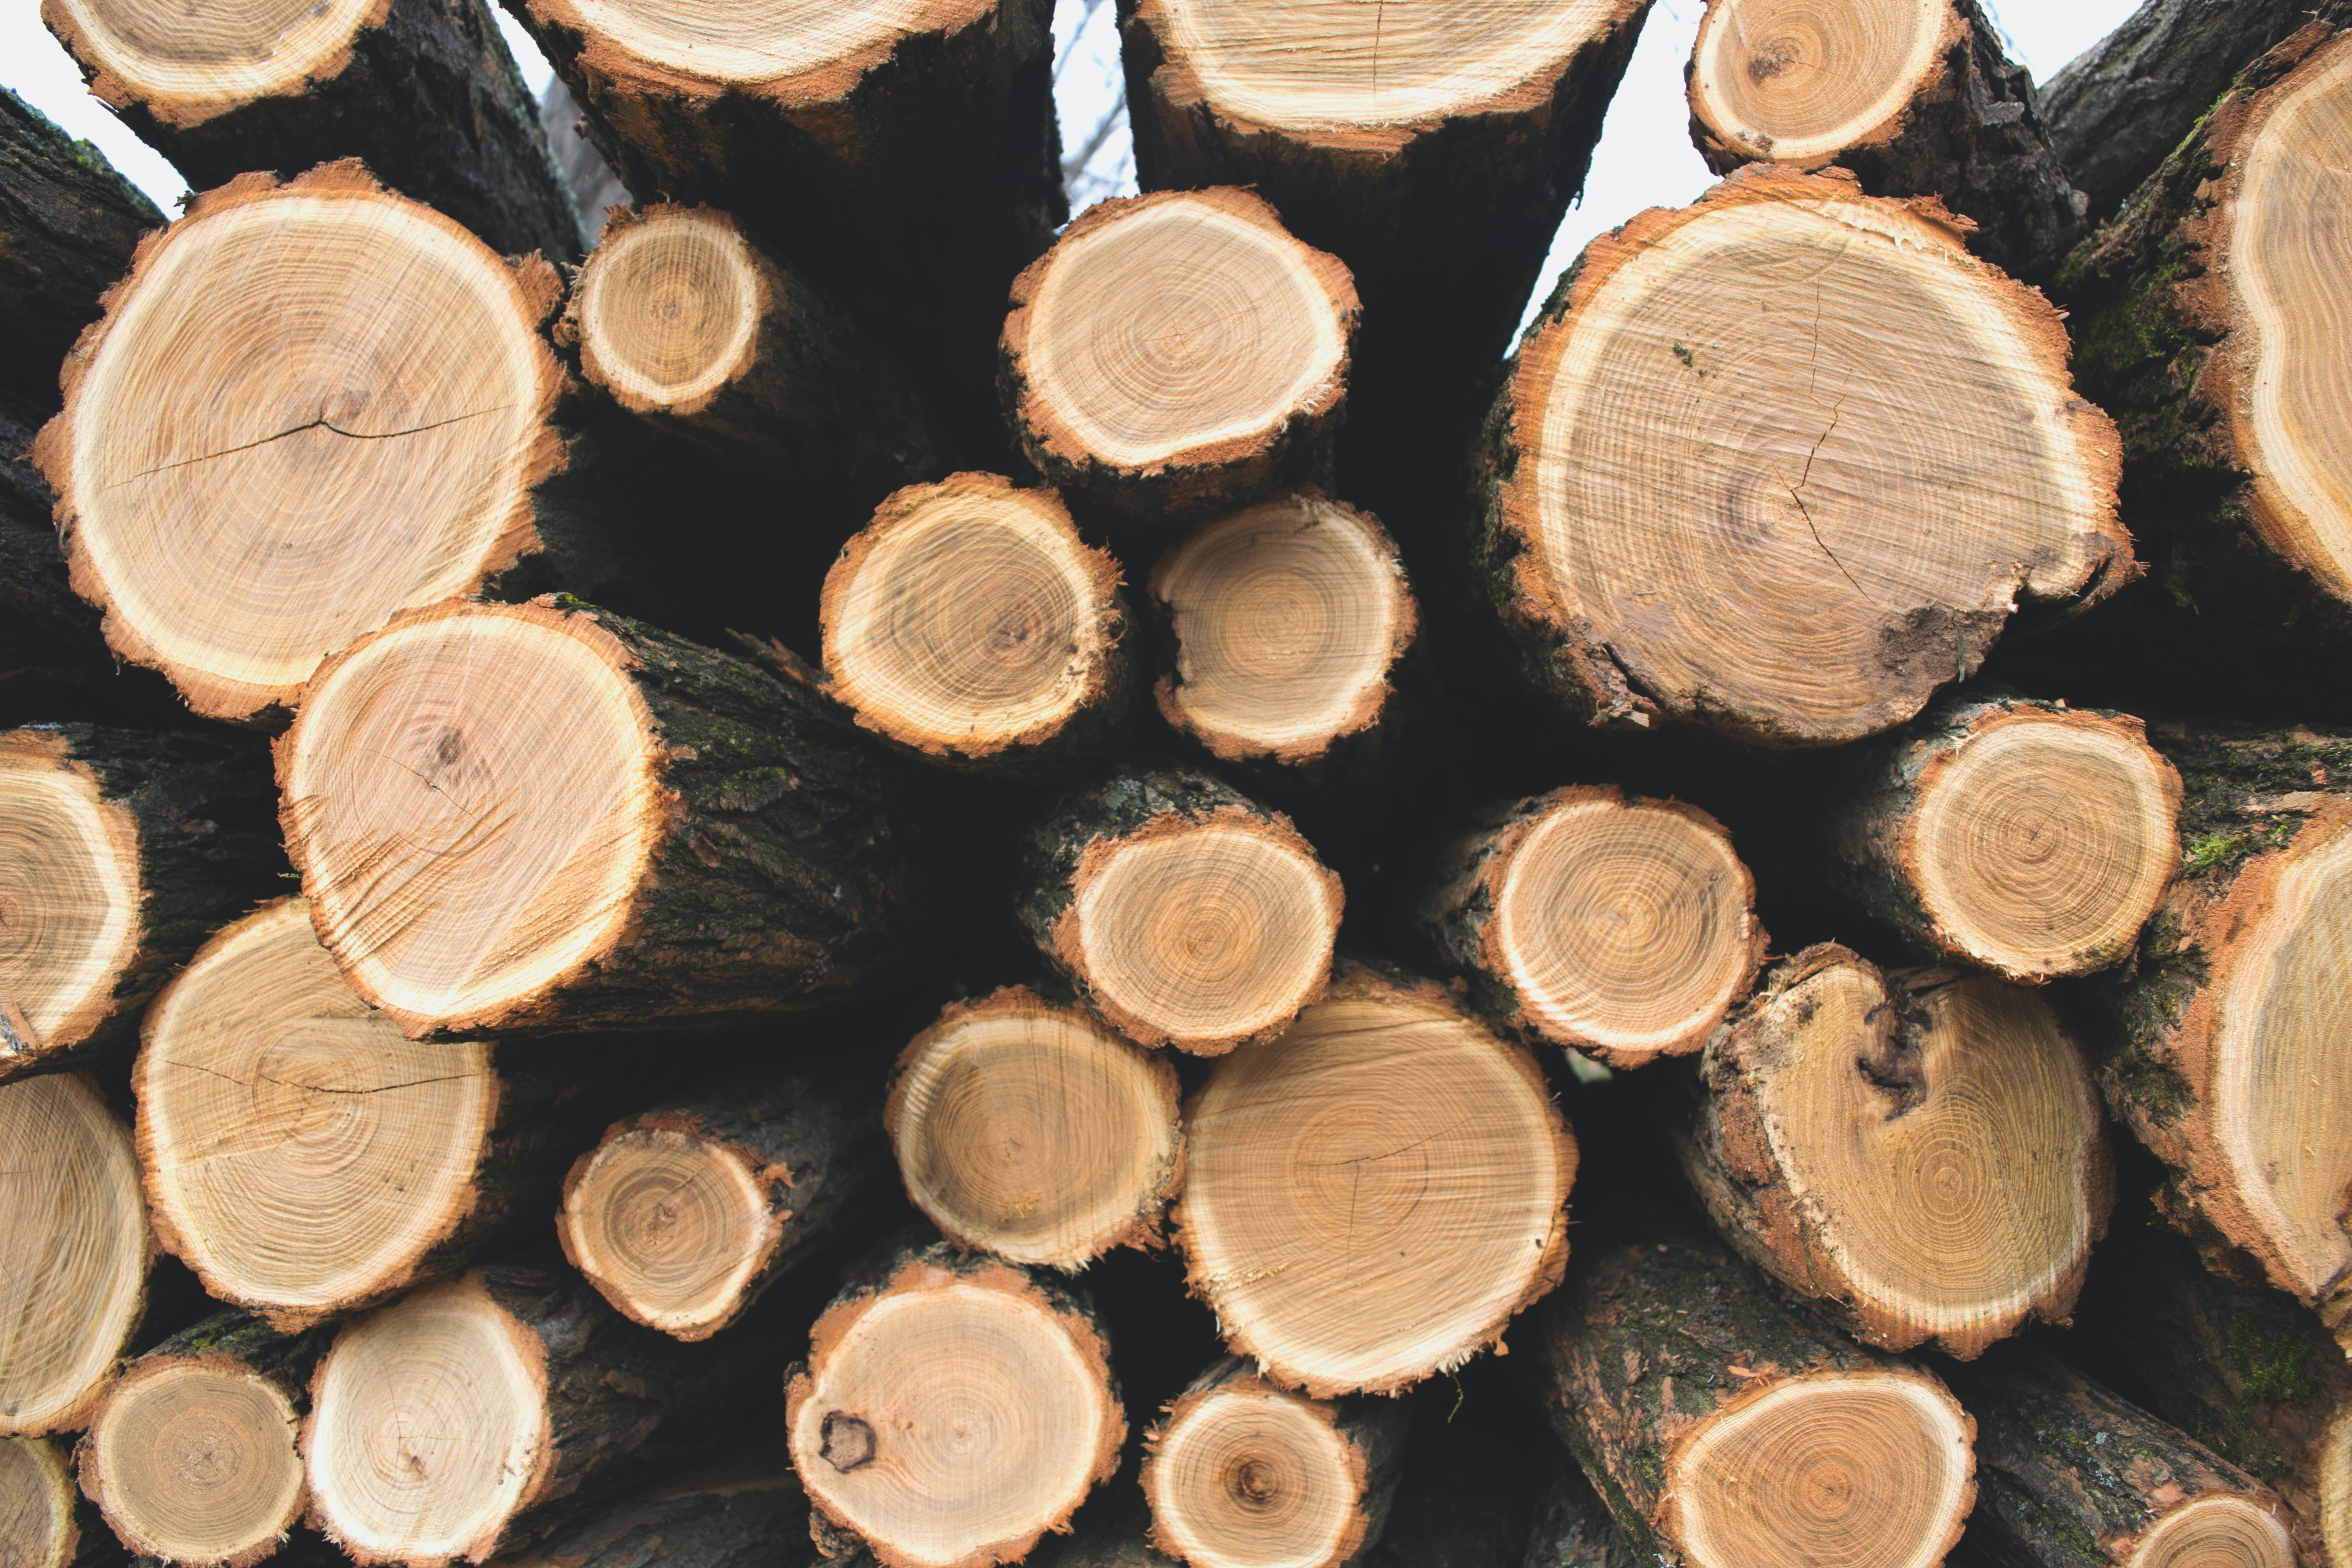 Wholesale of wood and products for the first-stage processing of wood in Tallinn